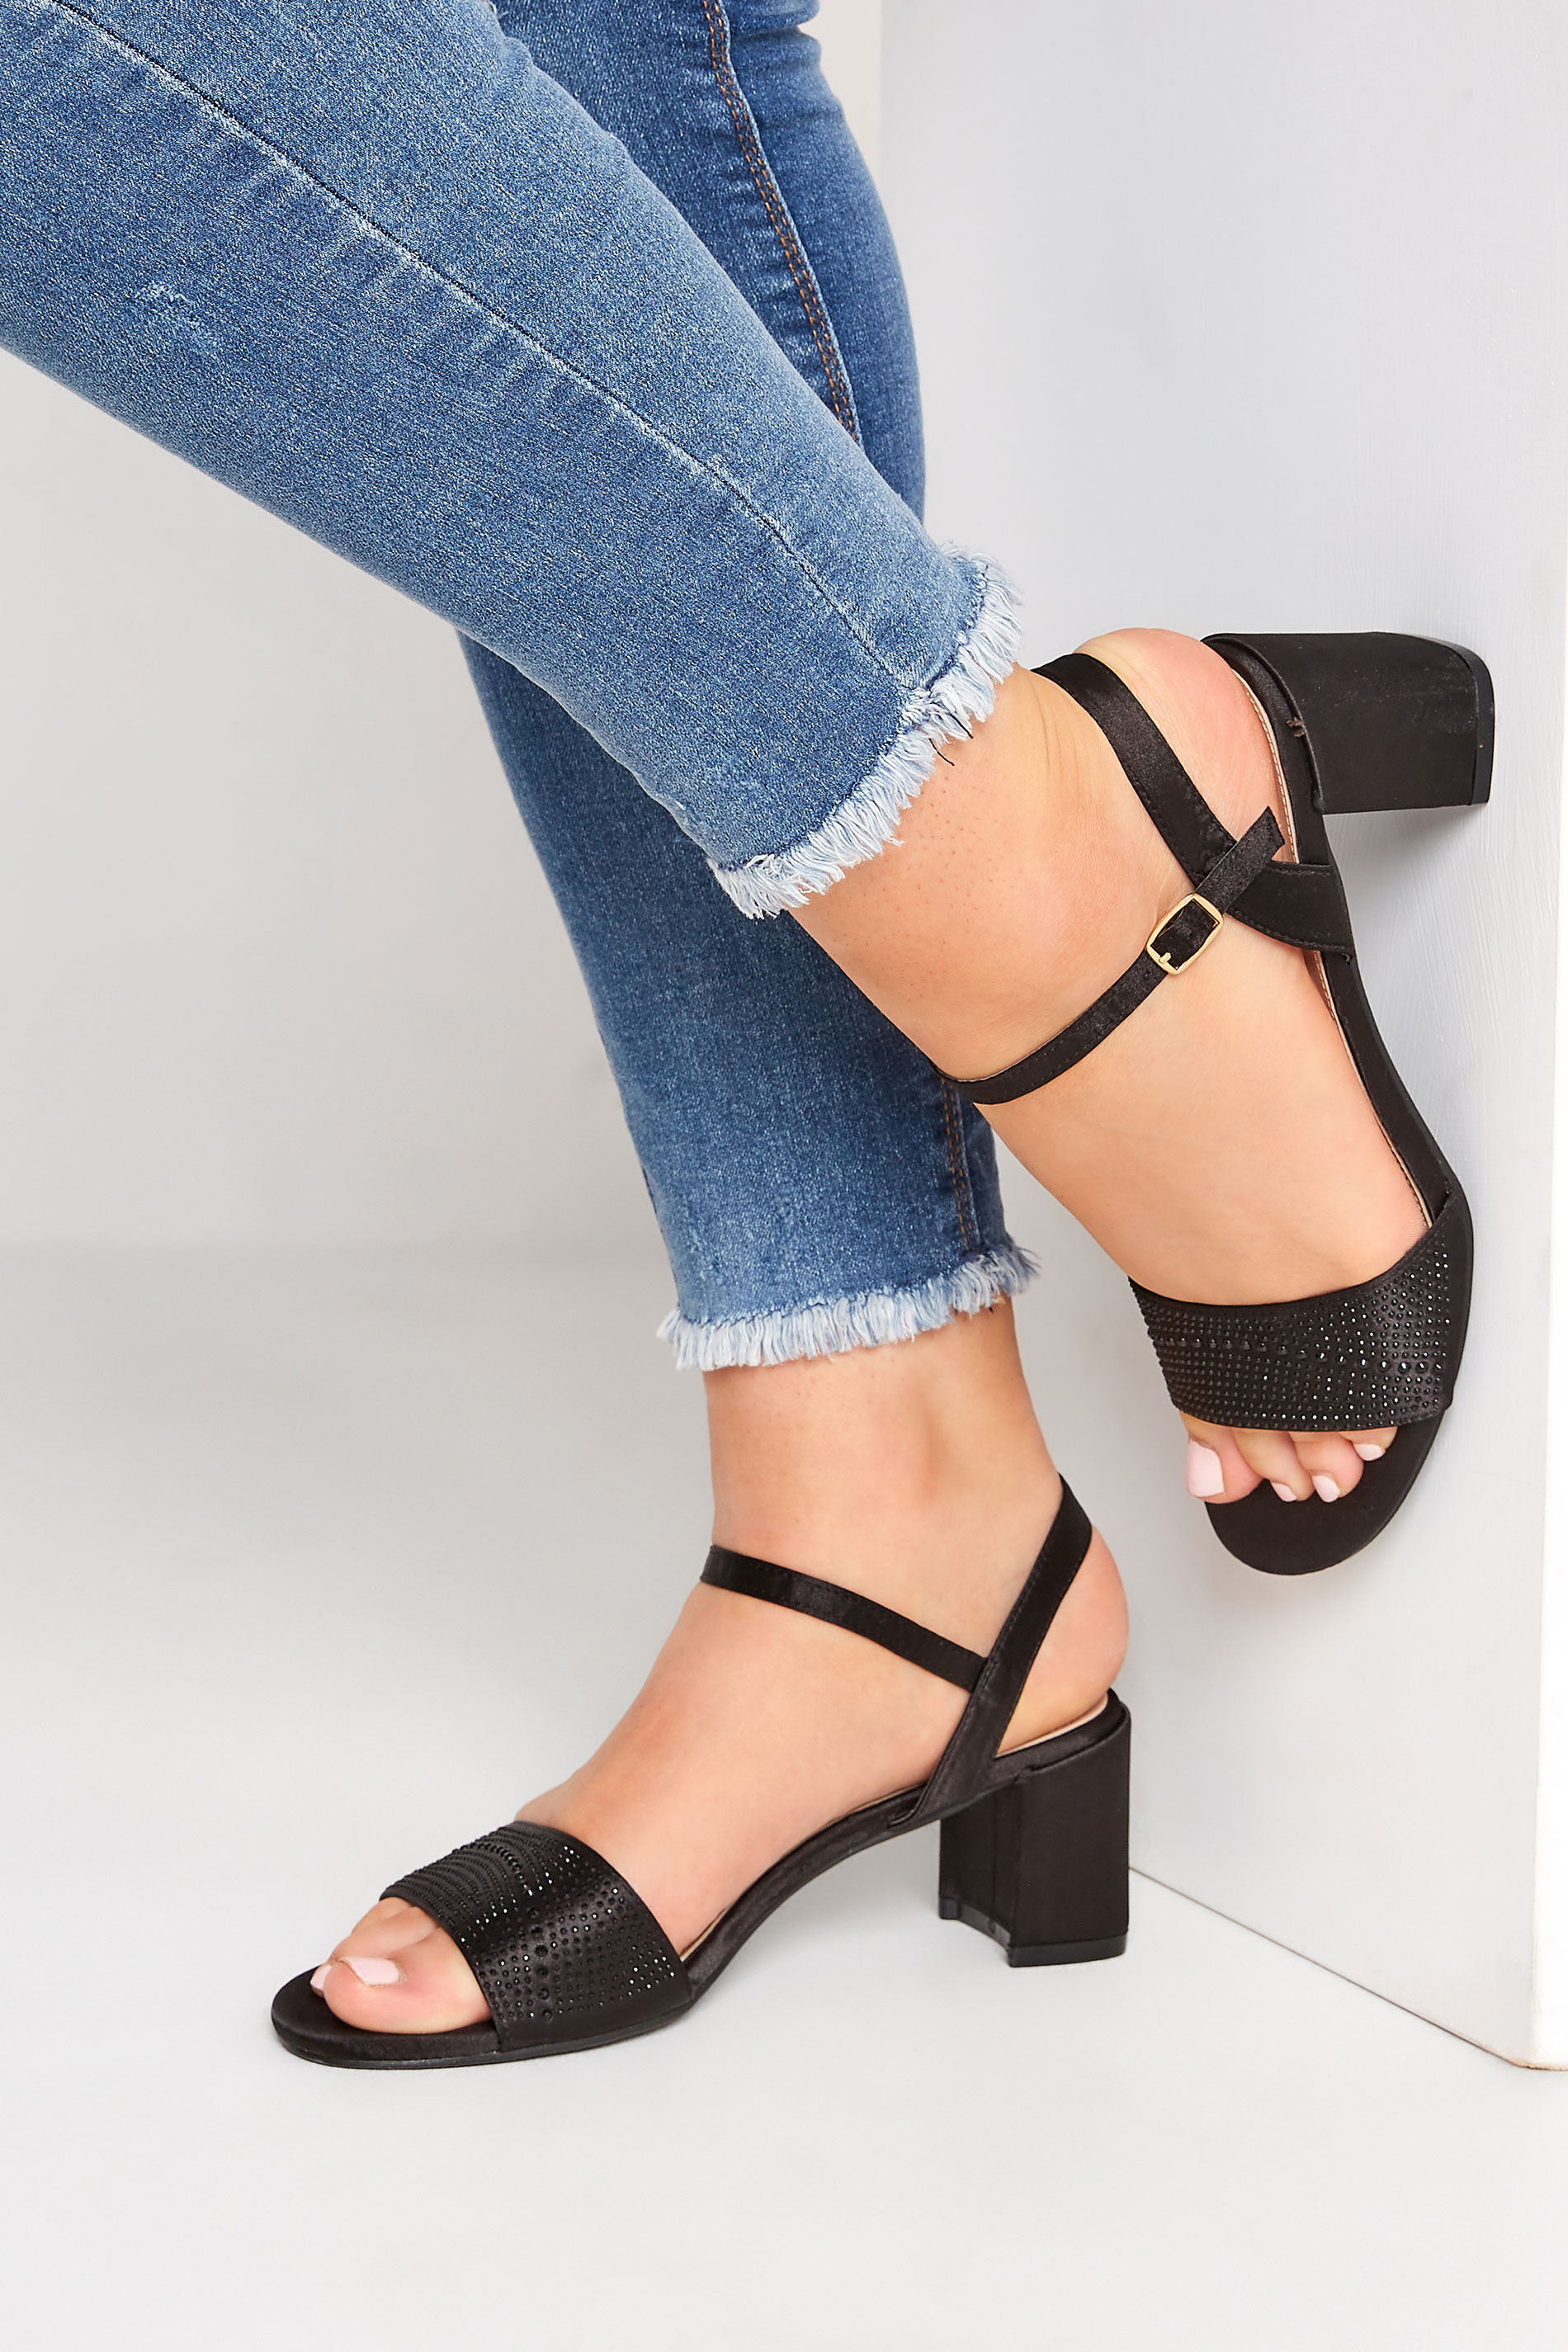 LIMITED COLLECTION Black Satin Embellished Block Heel Sandals in Wide E Fit | Yours Clothing 1